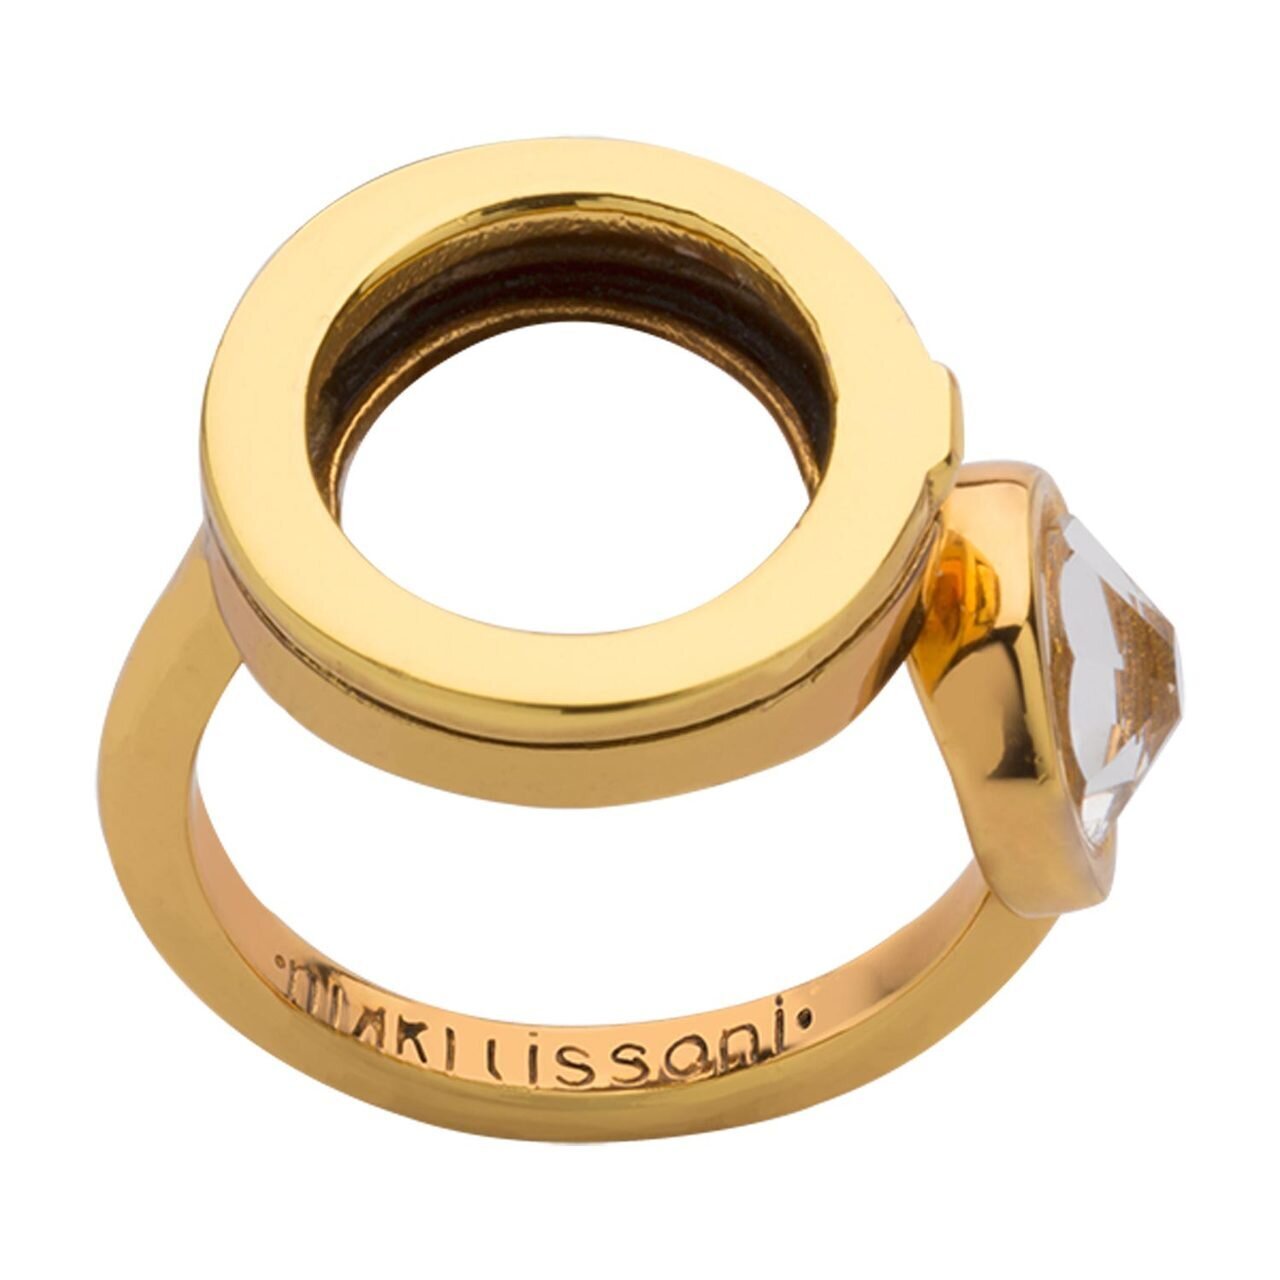 Nikki Lissoni Interchangeable Open Ring with Swarovski Stone Gold-plated Size 11 R1007G11